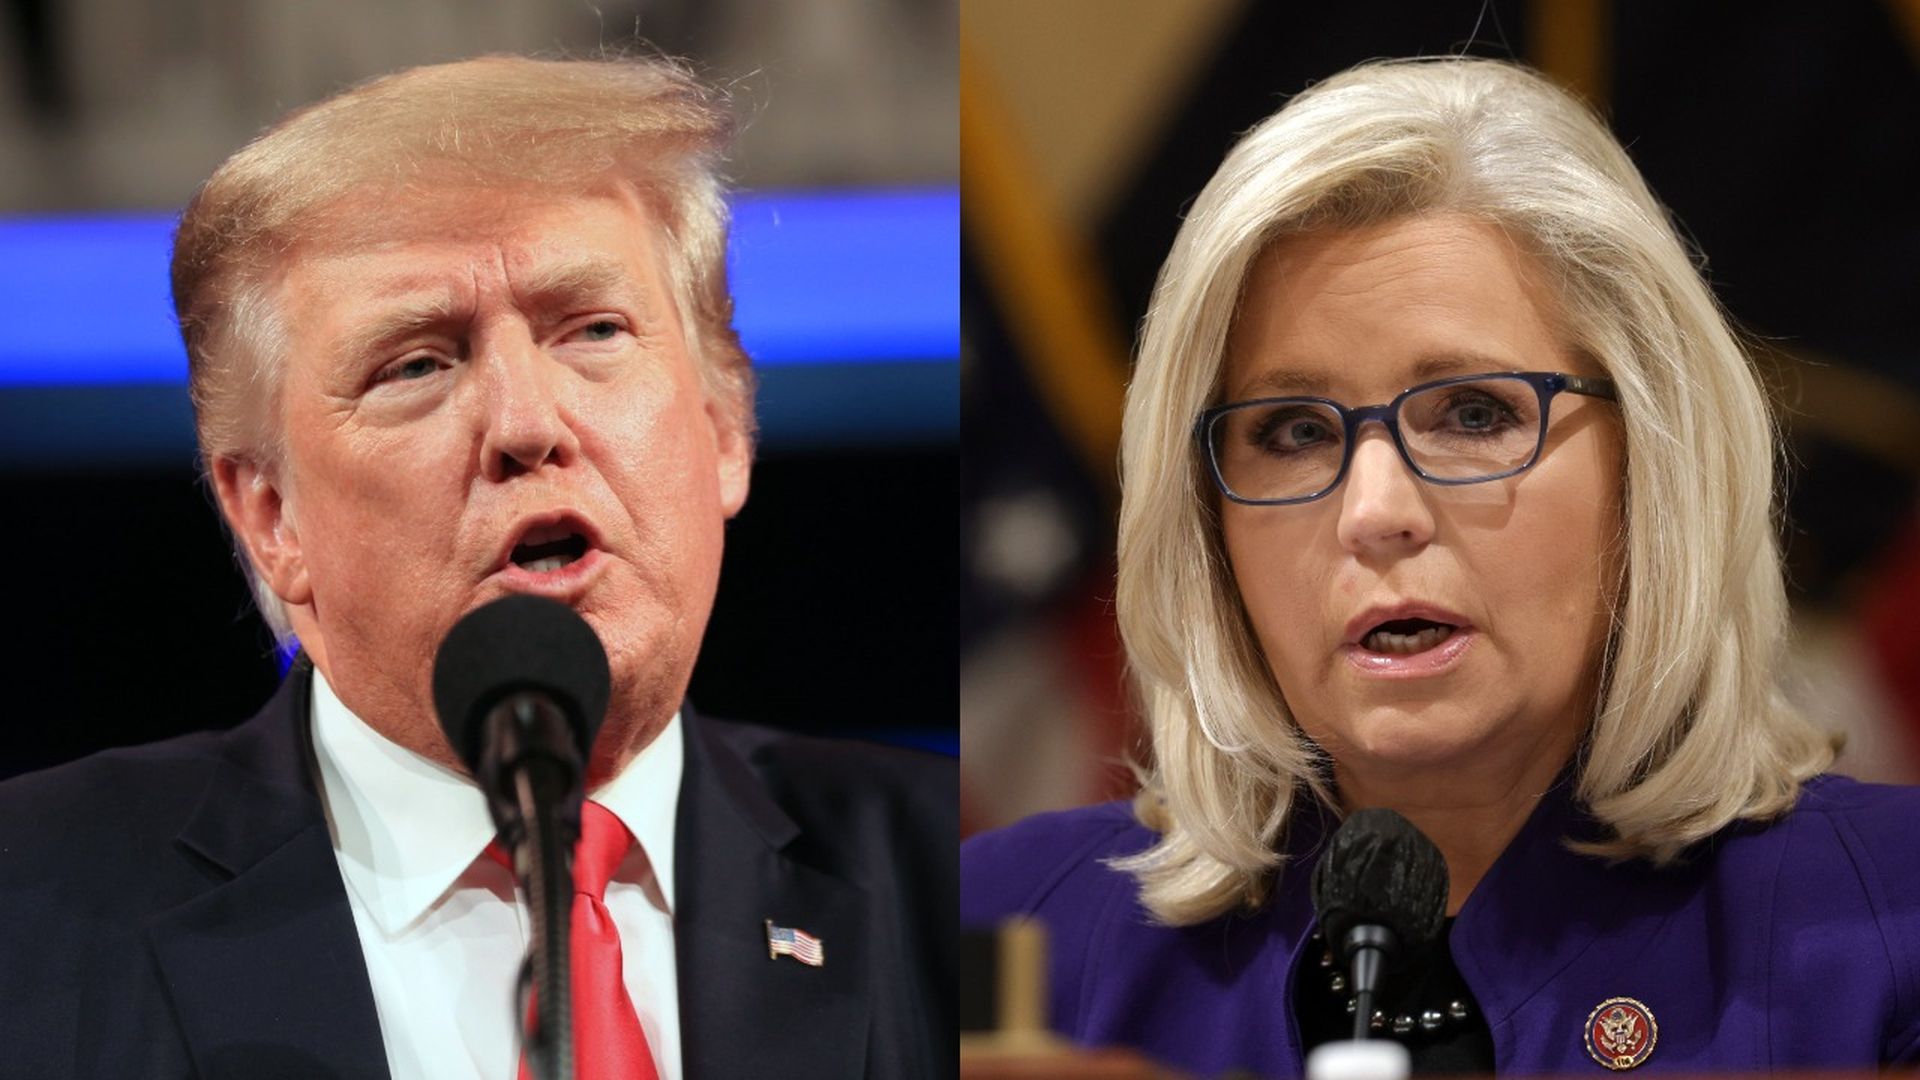 Photo of Donald Trump speaking on the left and Liz Cheney speaking on the right